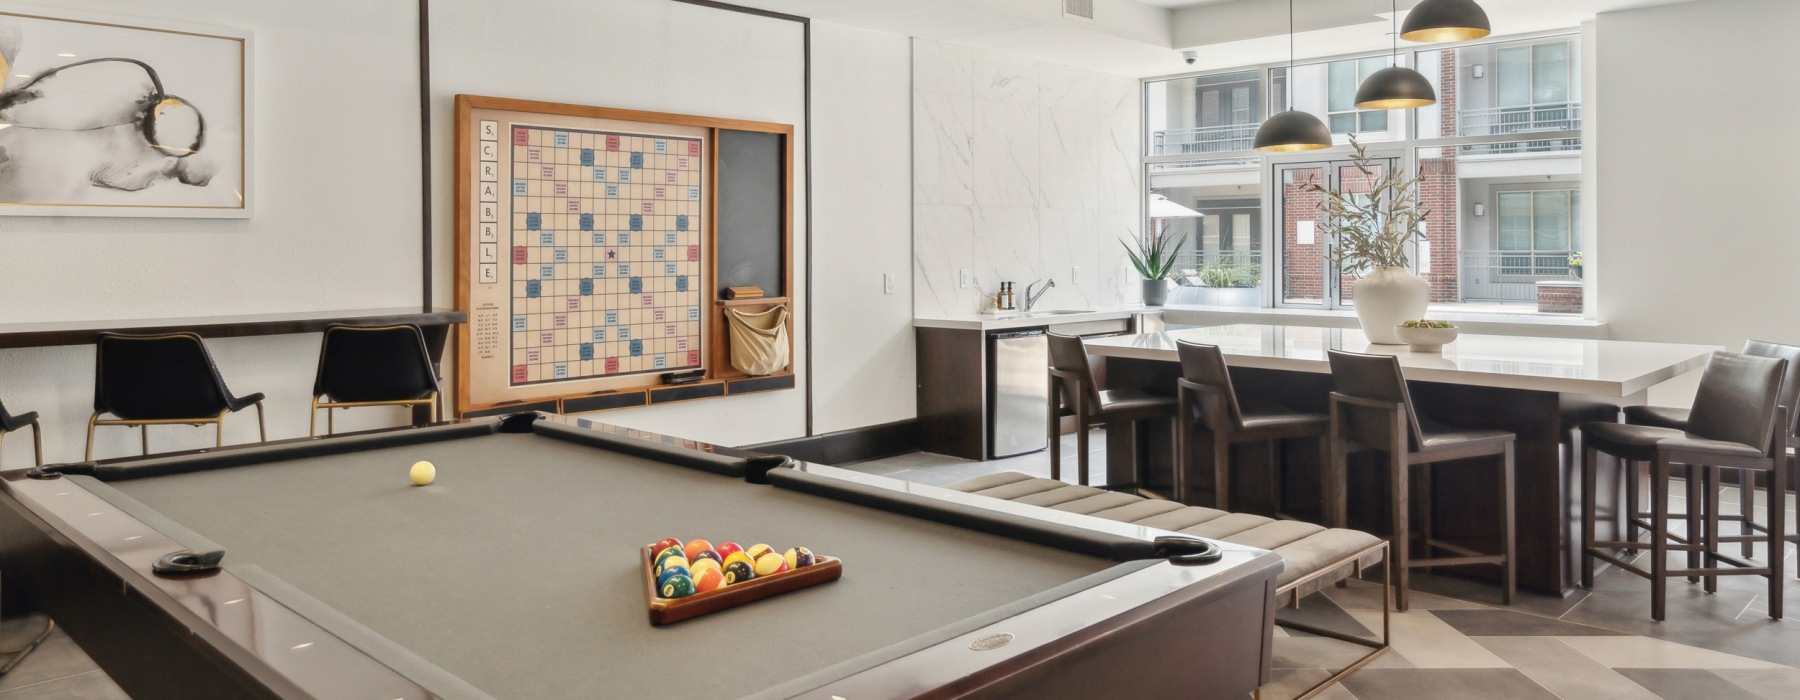 Spacious and well lit game room with billiard table and large windows 